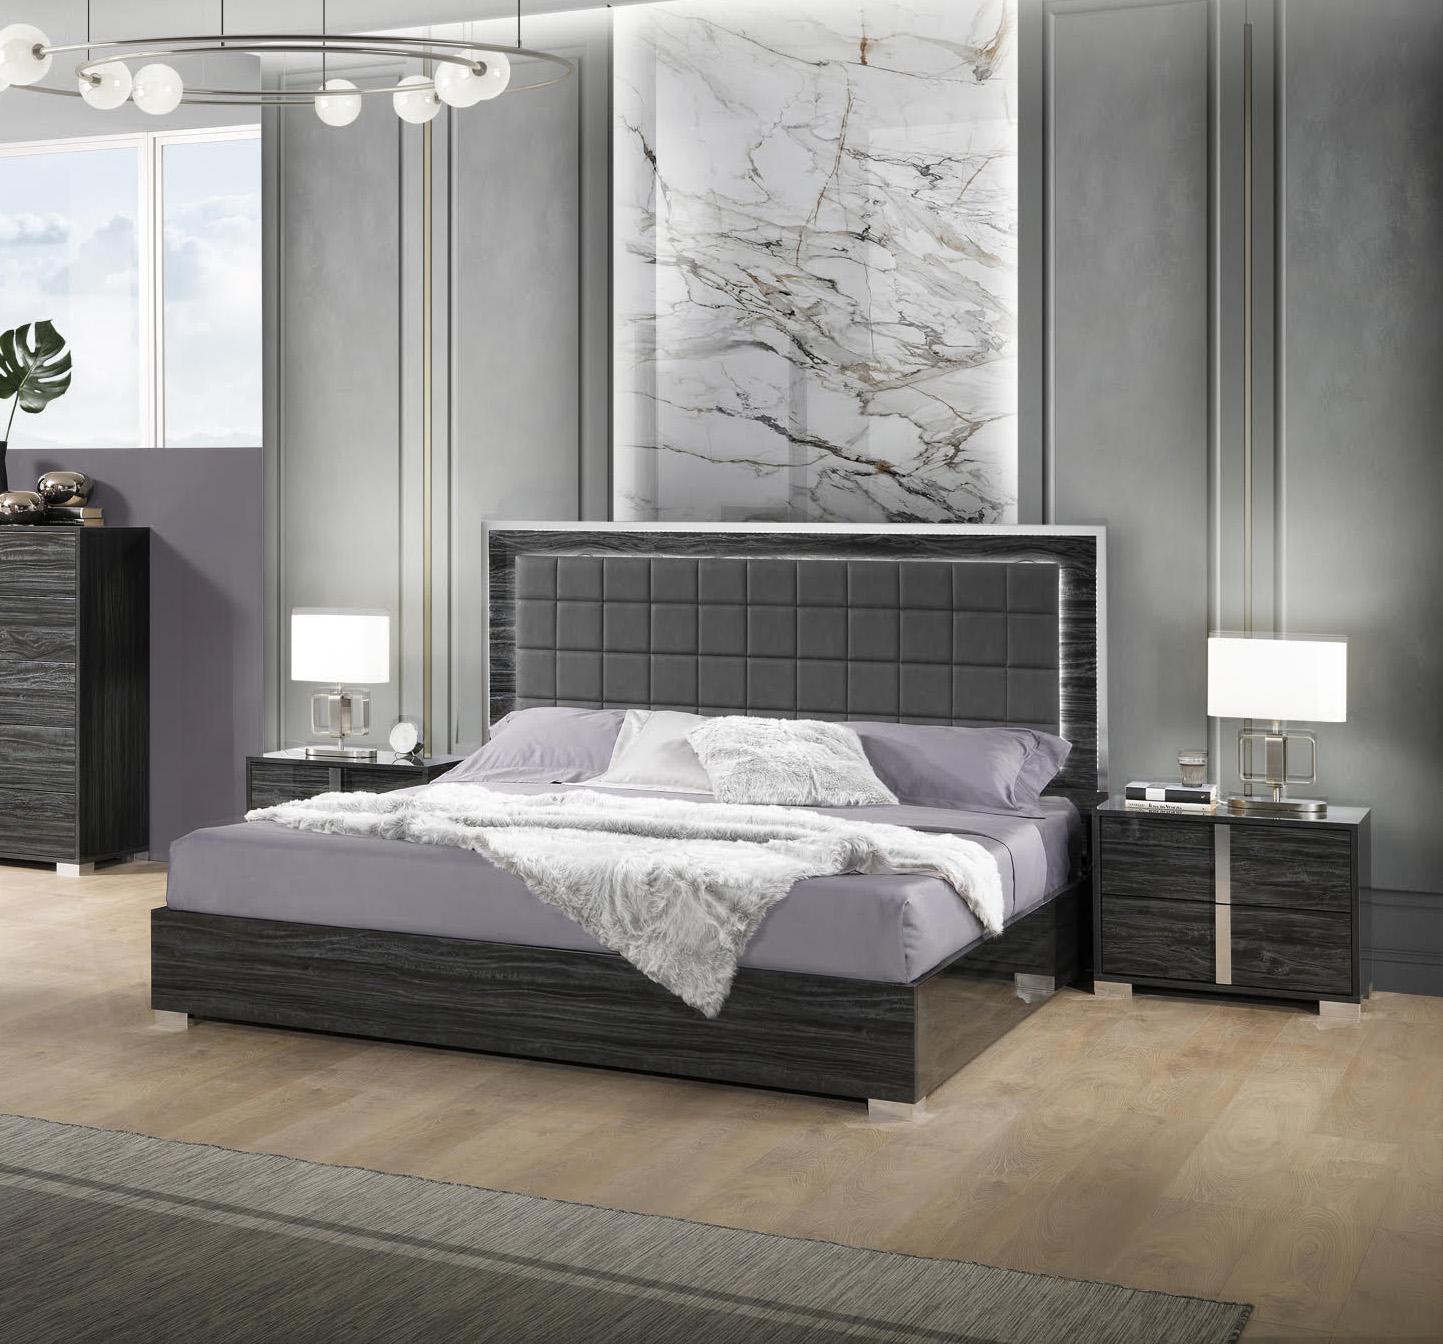 

    
Contemporary Queen Size Bedroom Set 3Pcs in Gloss Grey MADE IN ITALY J&M Alice
